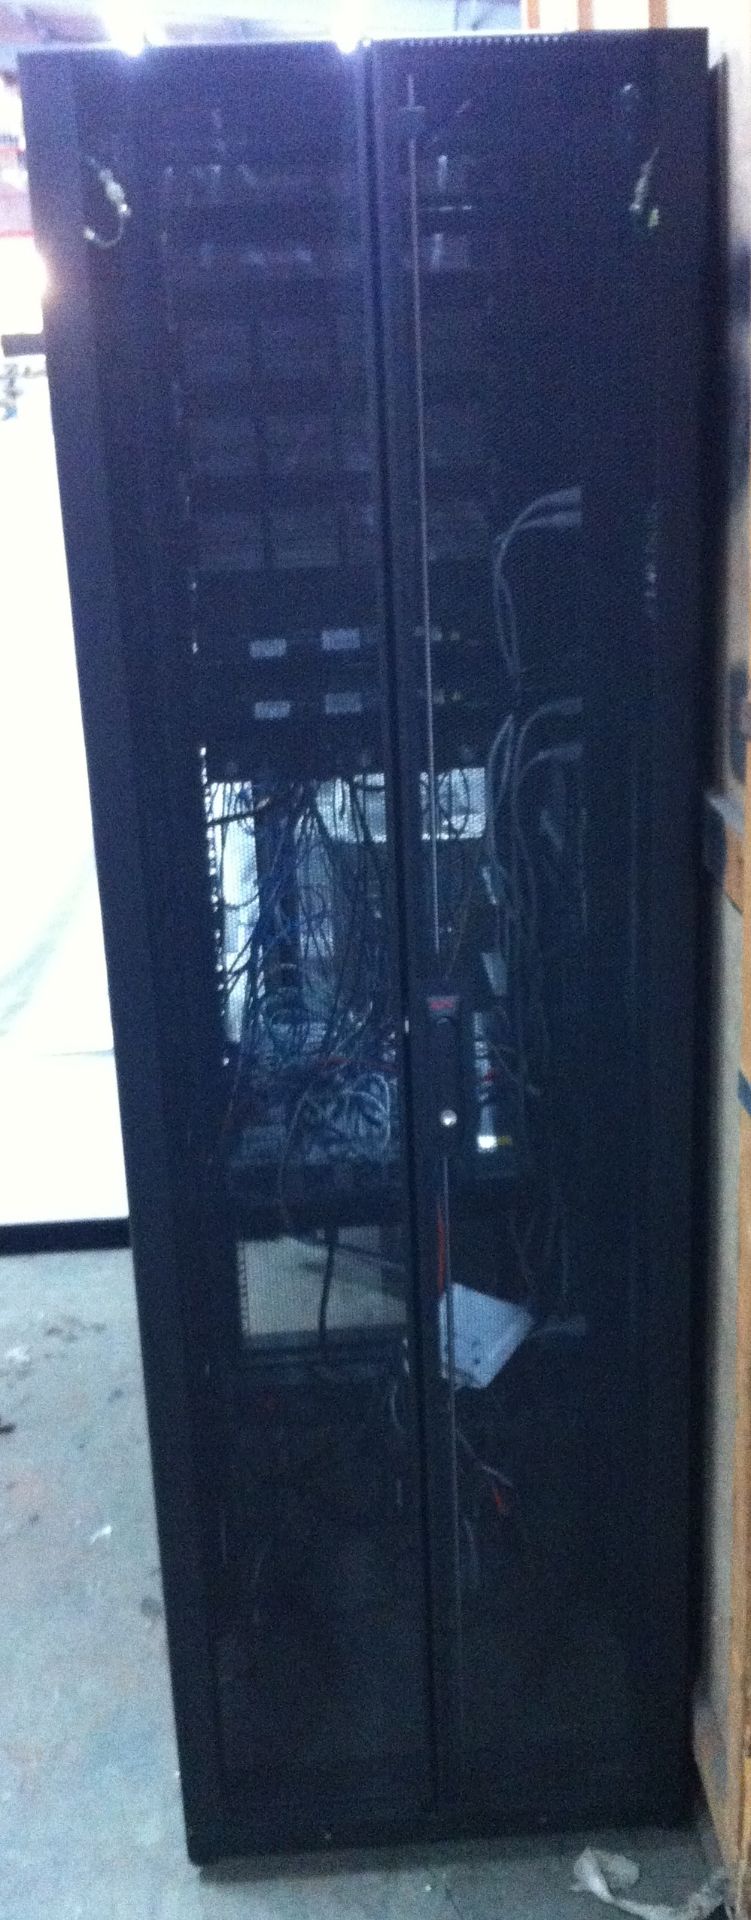 APC Black Server Cabinet with Contents - Image 3 of 8